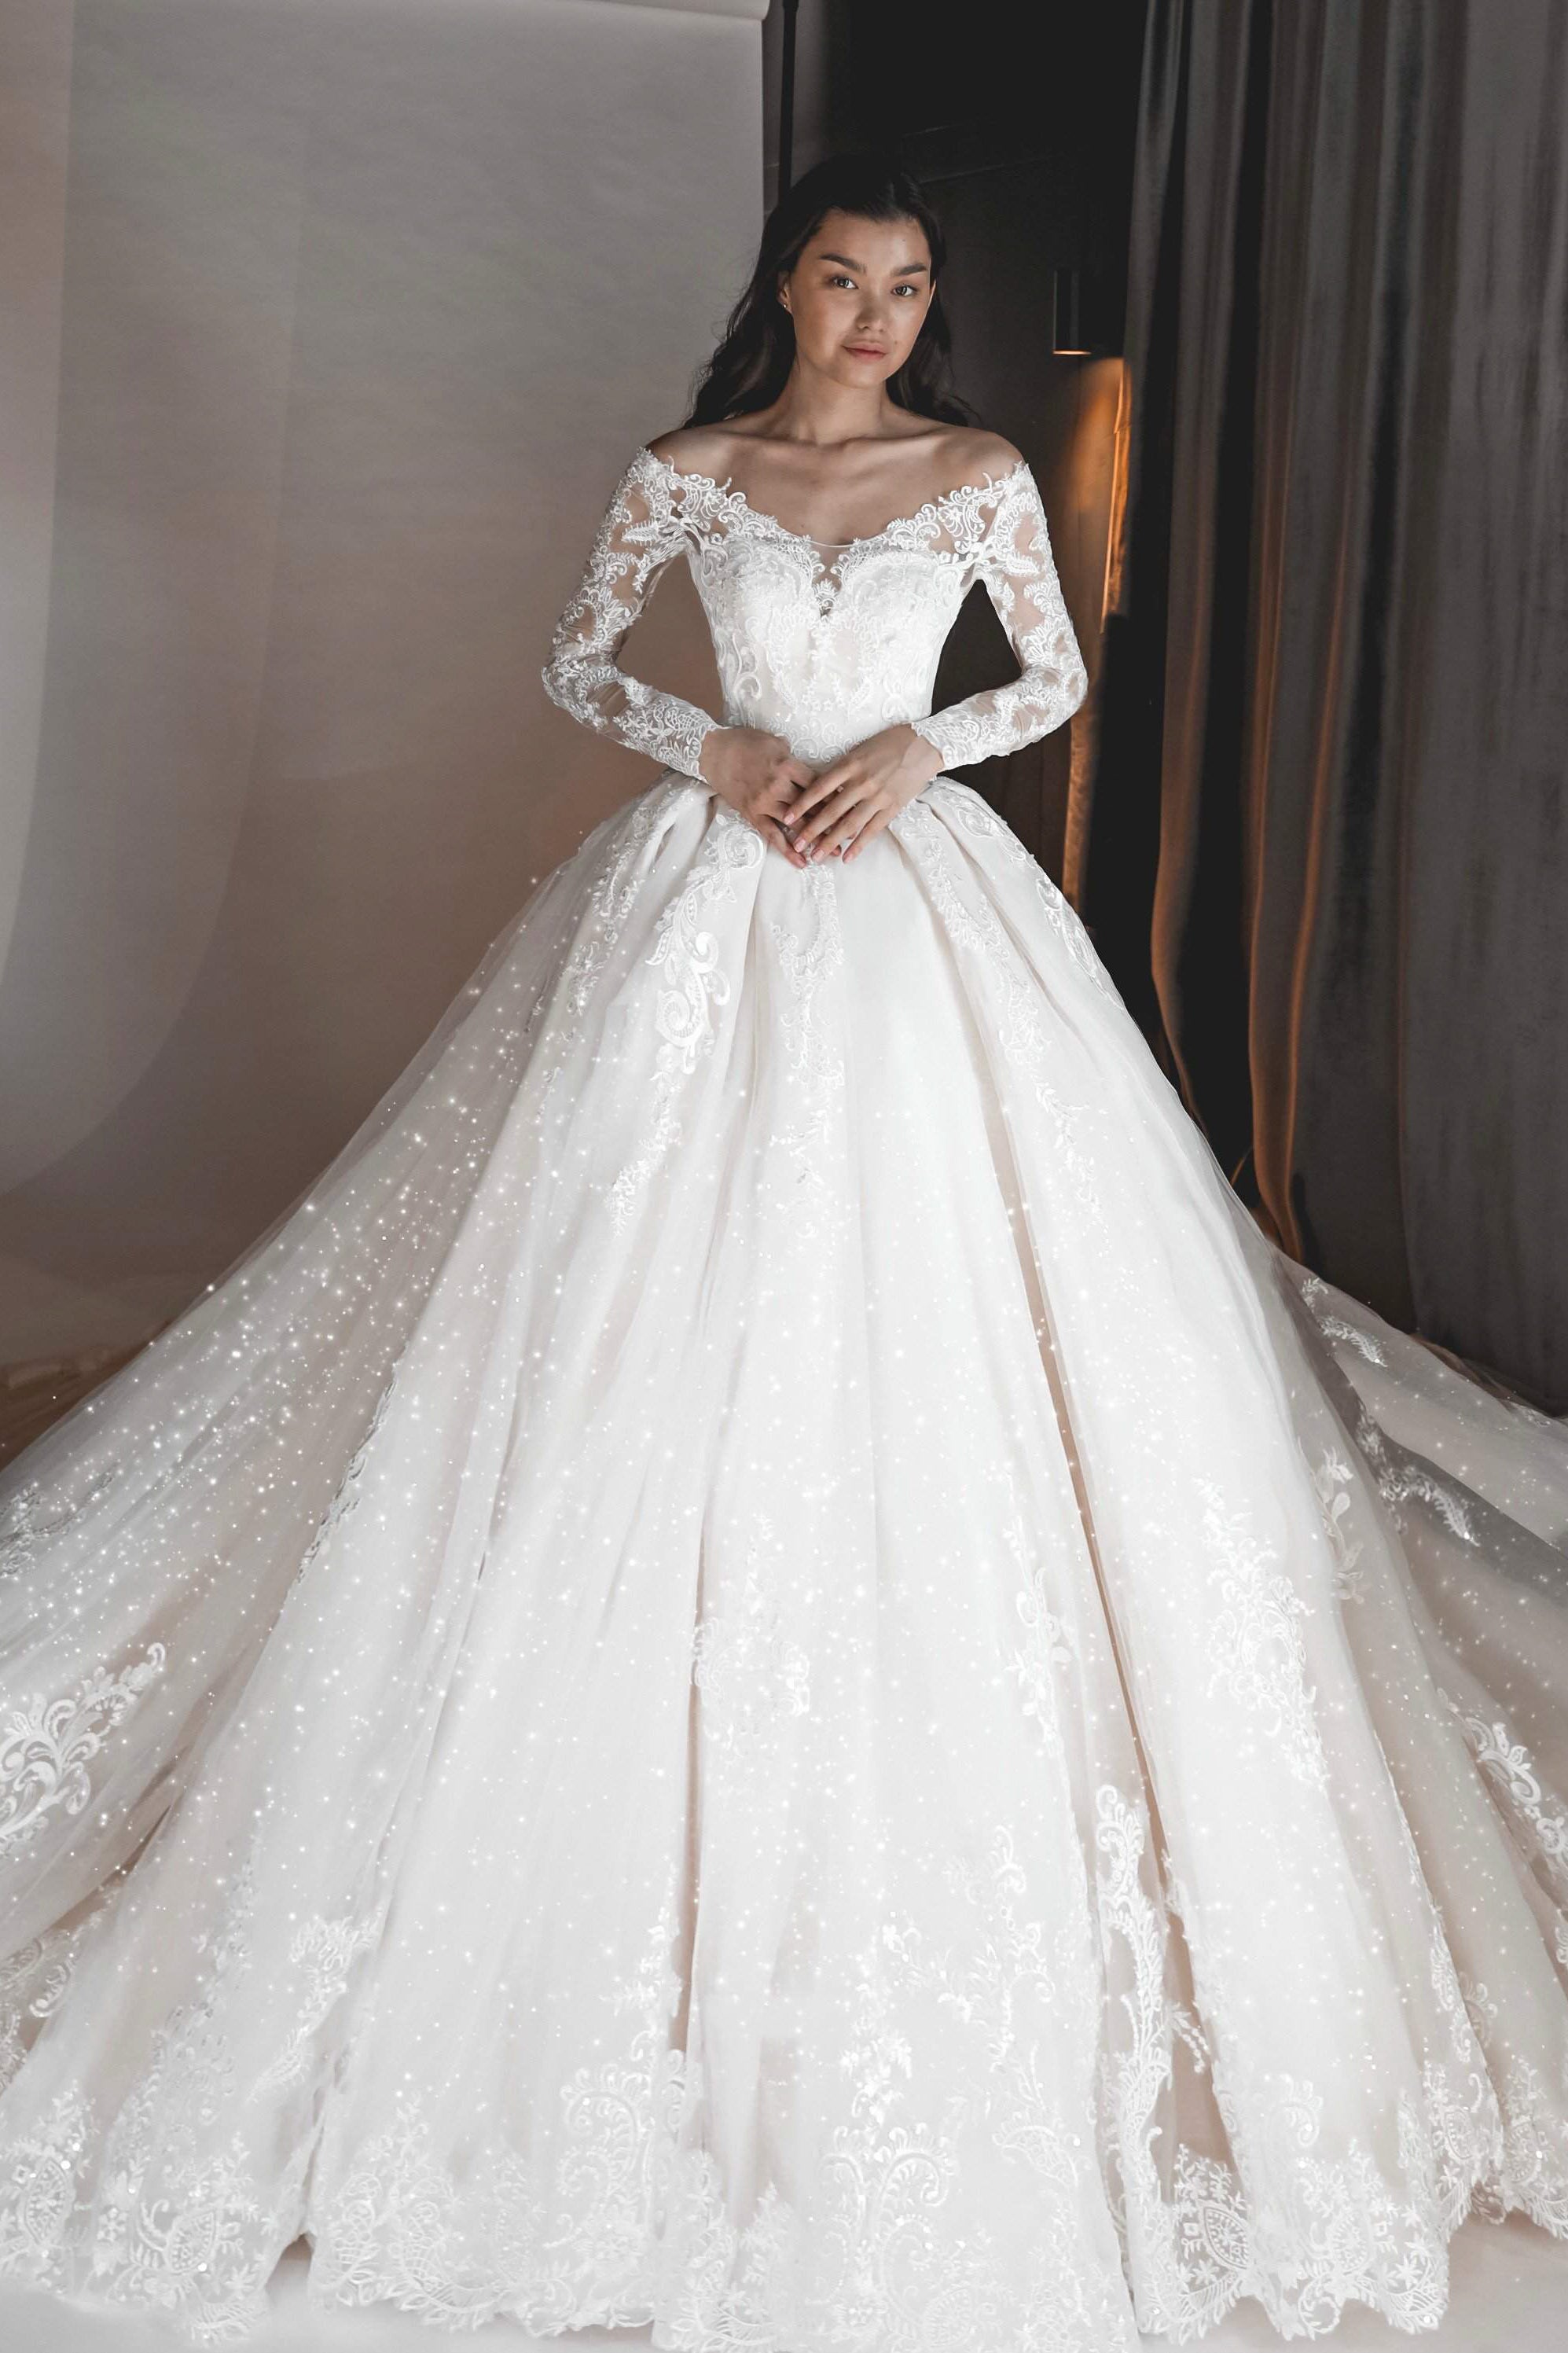 Top 10 Most Expensive Wedding Dress Designers in 2022